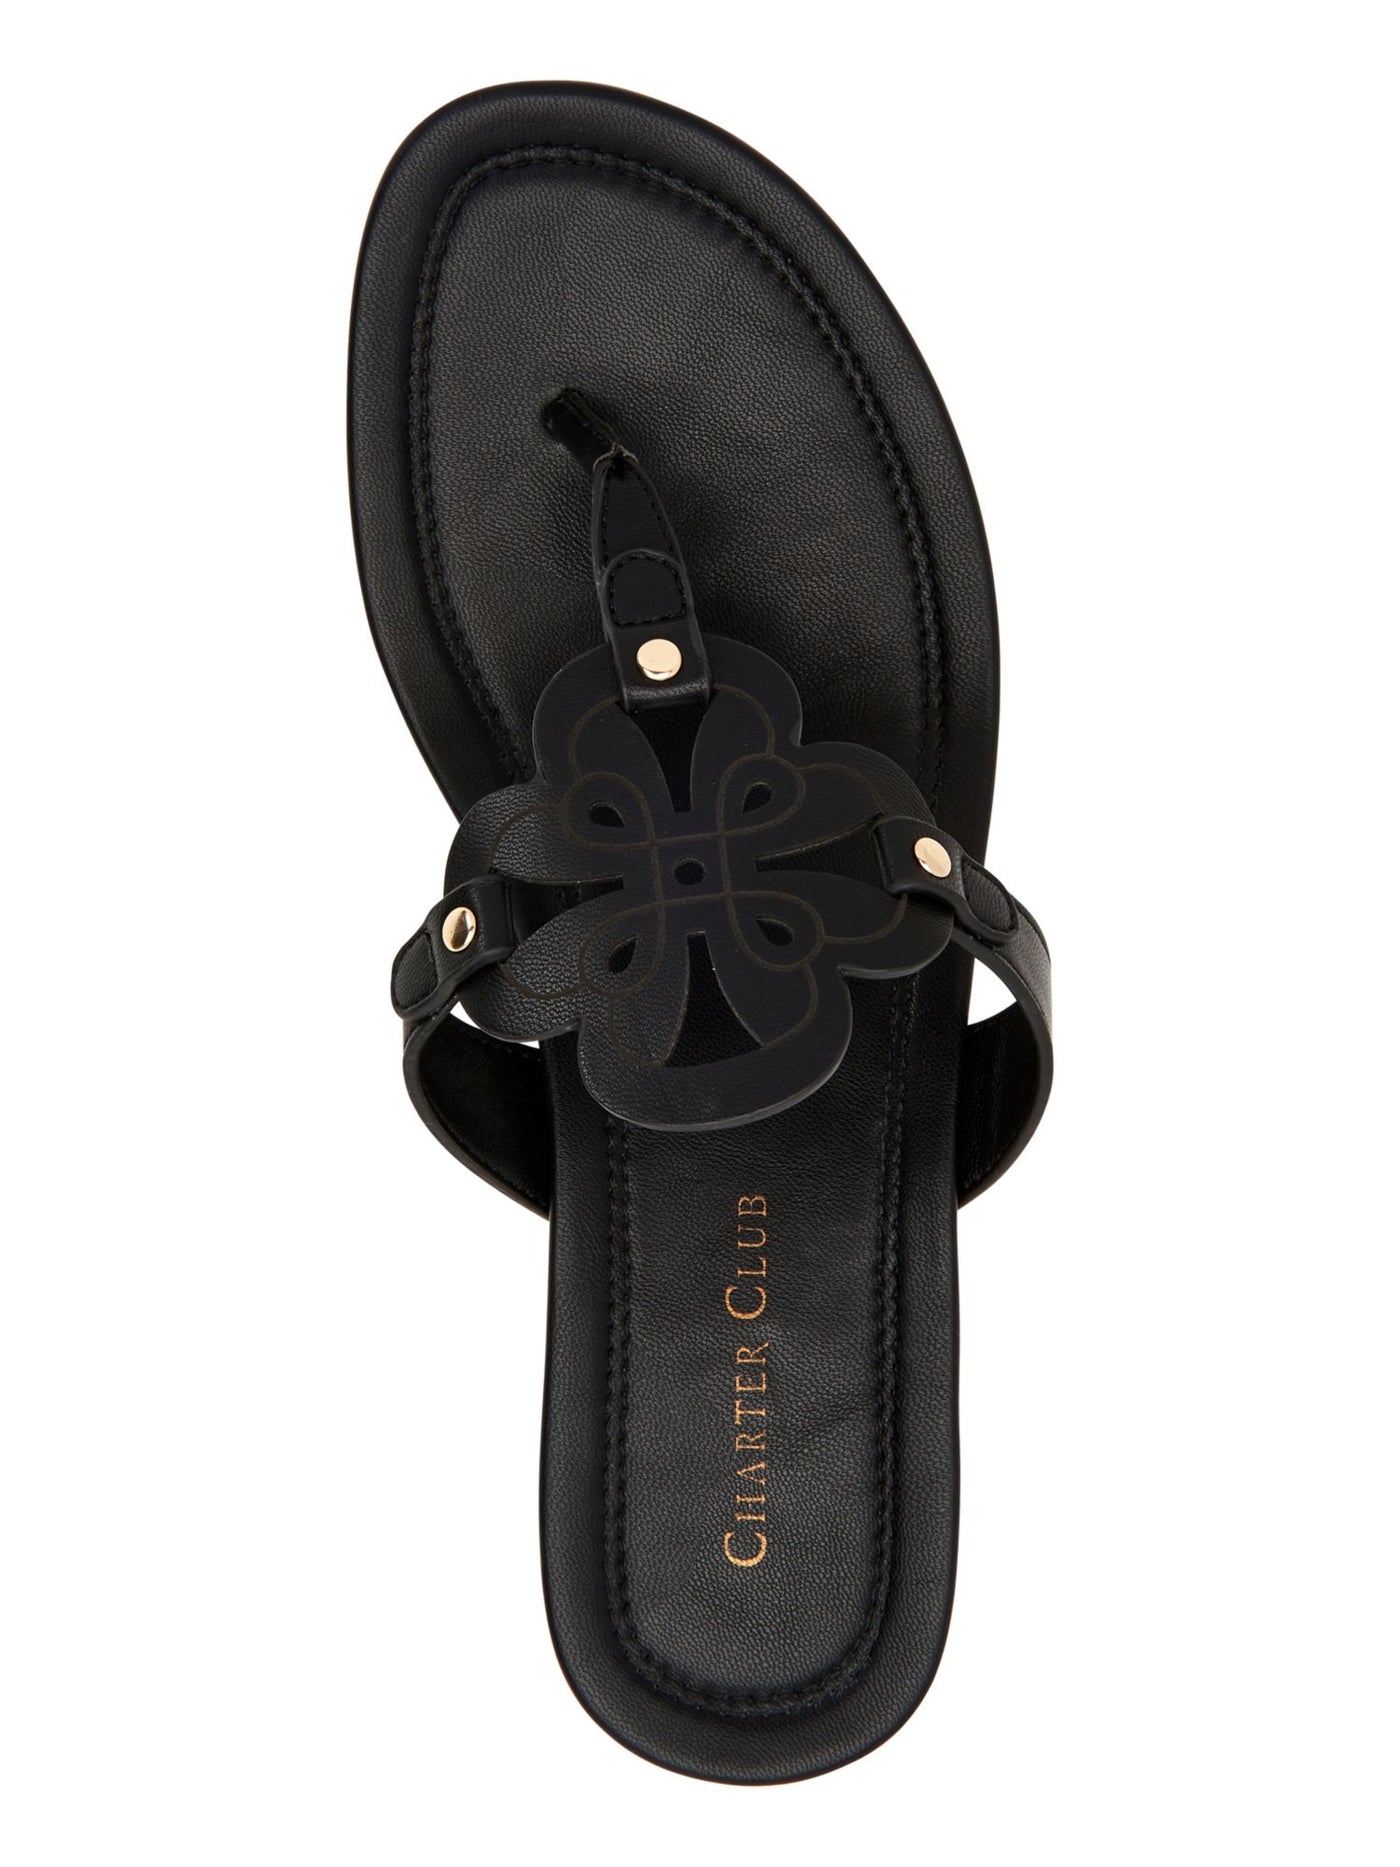 CHARTER CLUB Womens Black Cutout Medallion T-Strap Penelope Almond Toe Wedge Slip On Thong Sandals Shoes 8 M